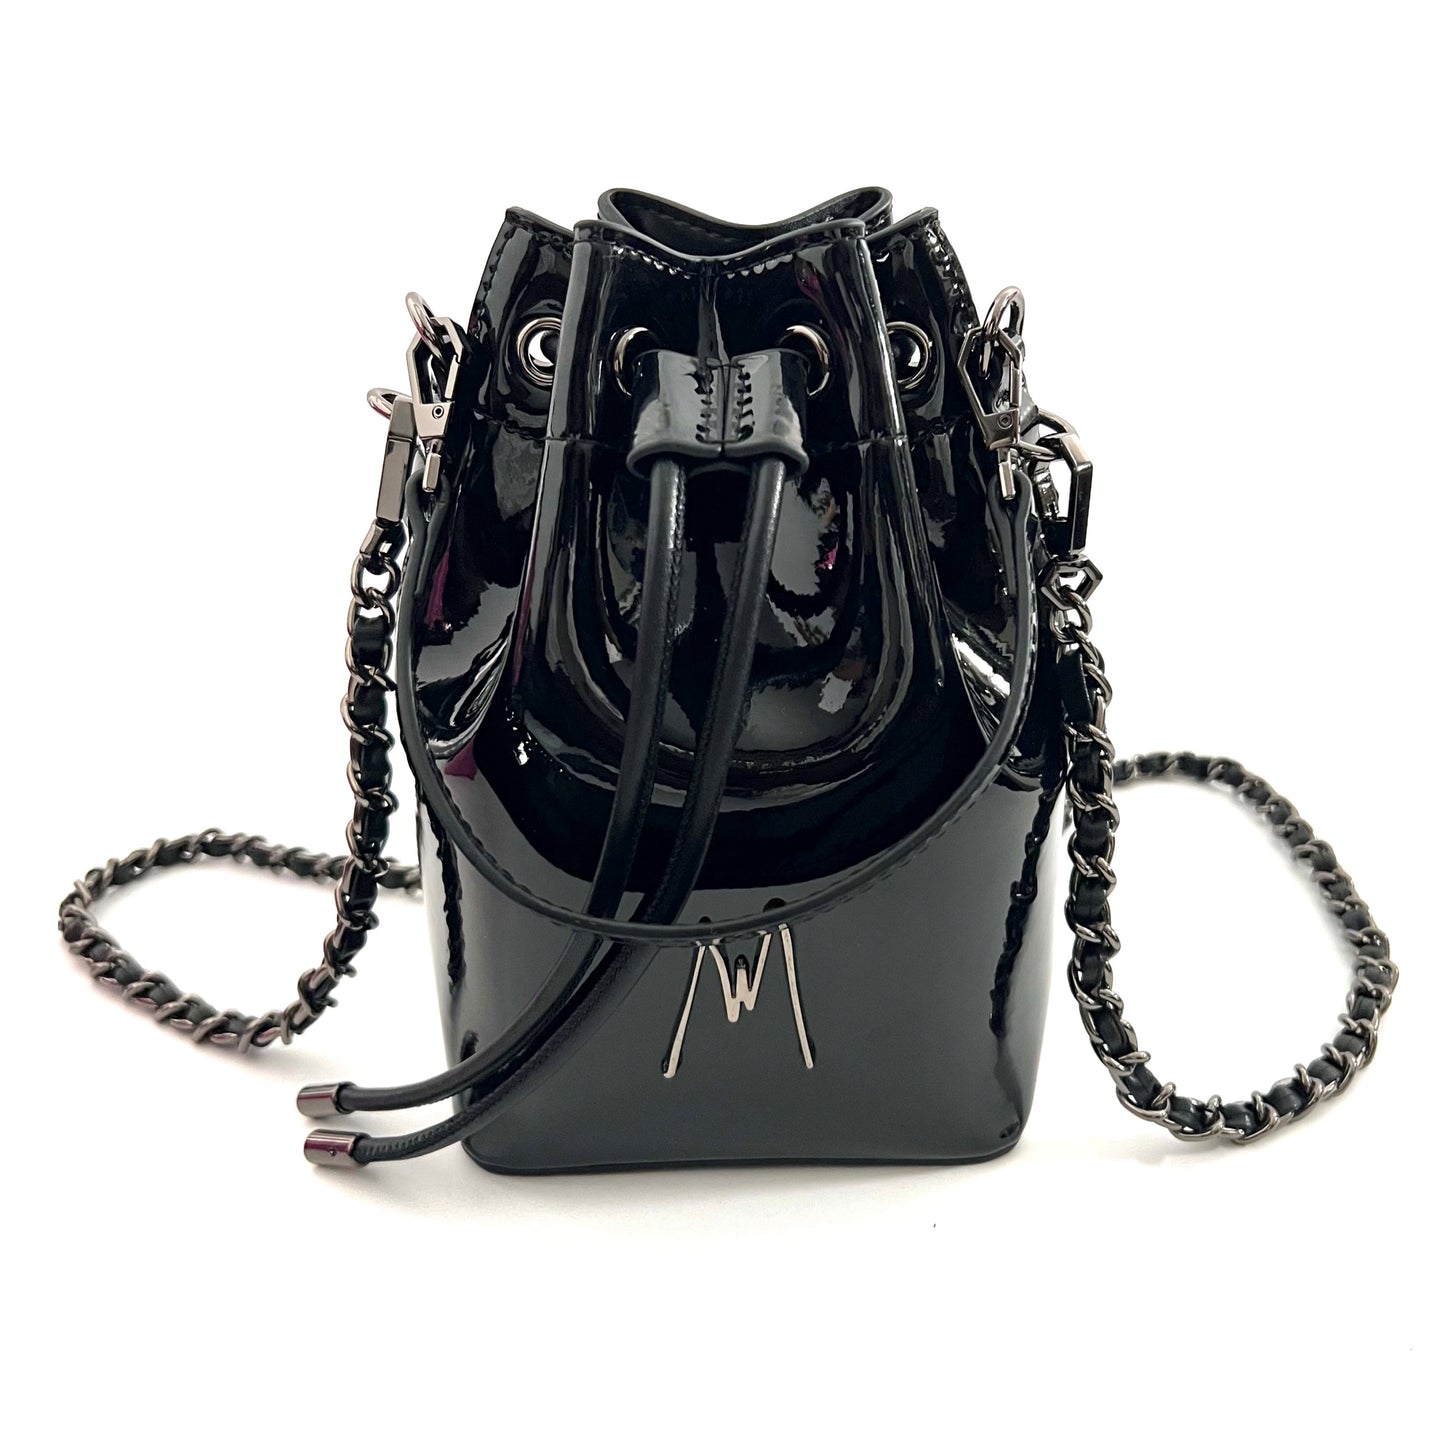 "THE BUCKET BAG" - Black Patent Leather